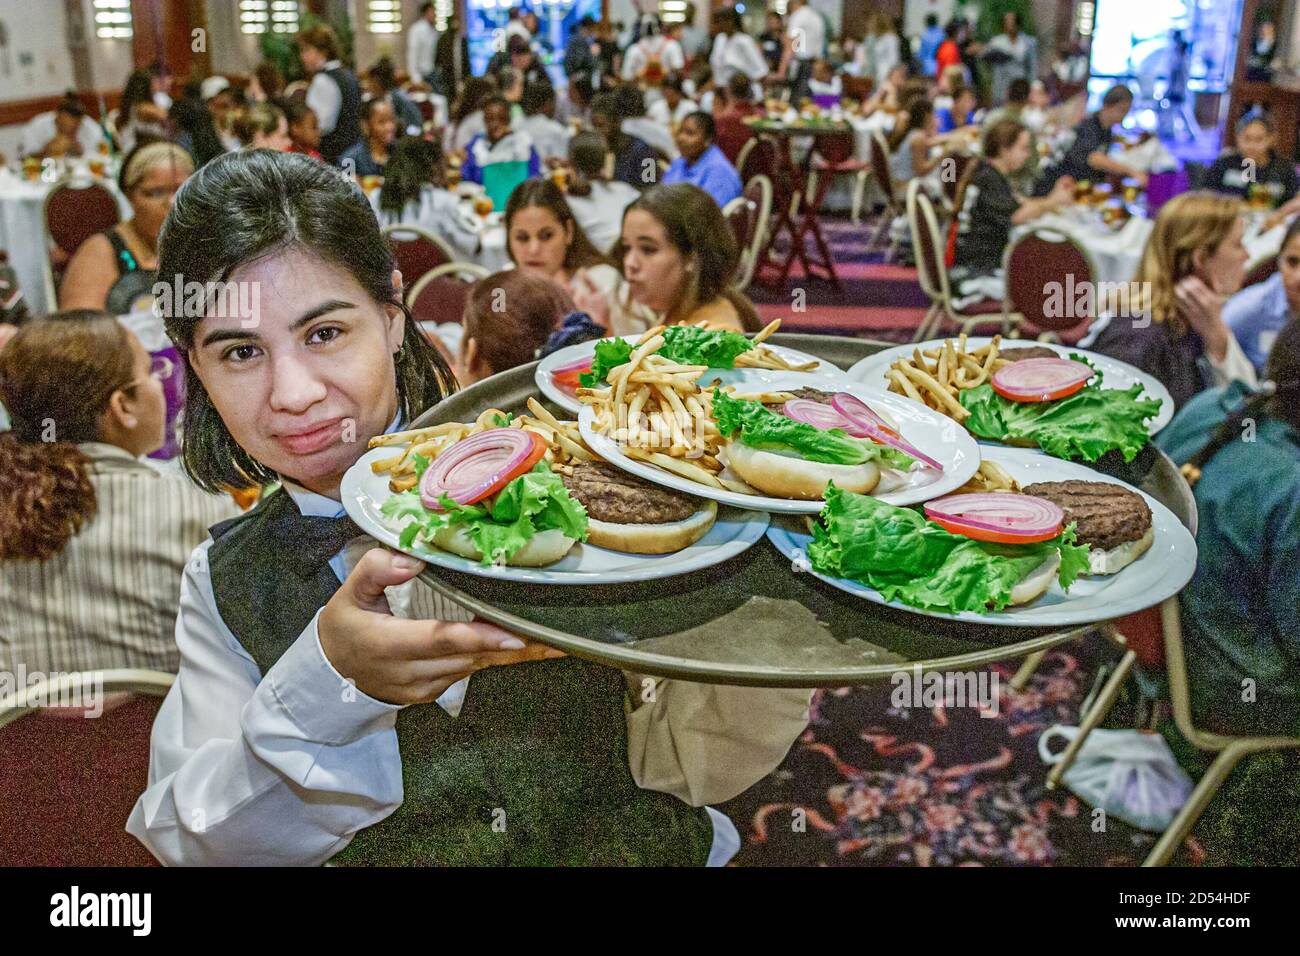 Miami Florida,Marriott Dadeland Hotel ballroom,student conference luncheon,Hispanic woman female waitress server serving,lunch holds holding tray plat Stock Photo